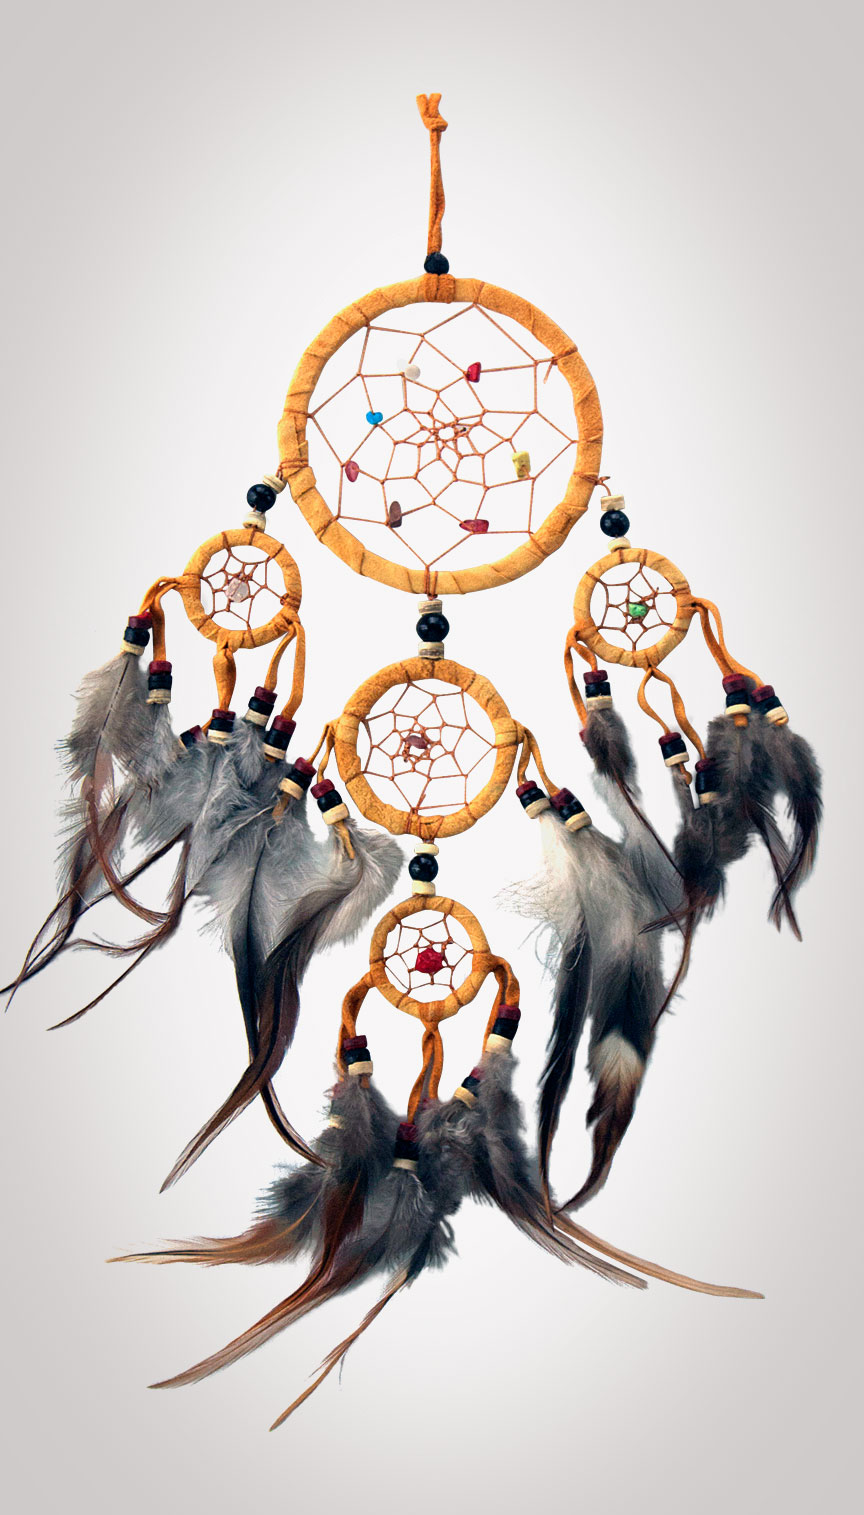 Shows an image of our dreamcatcher owg010